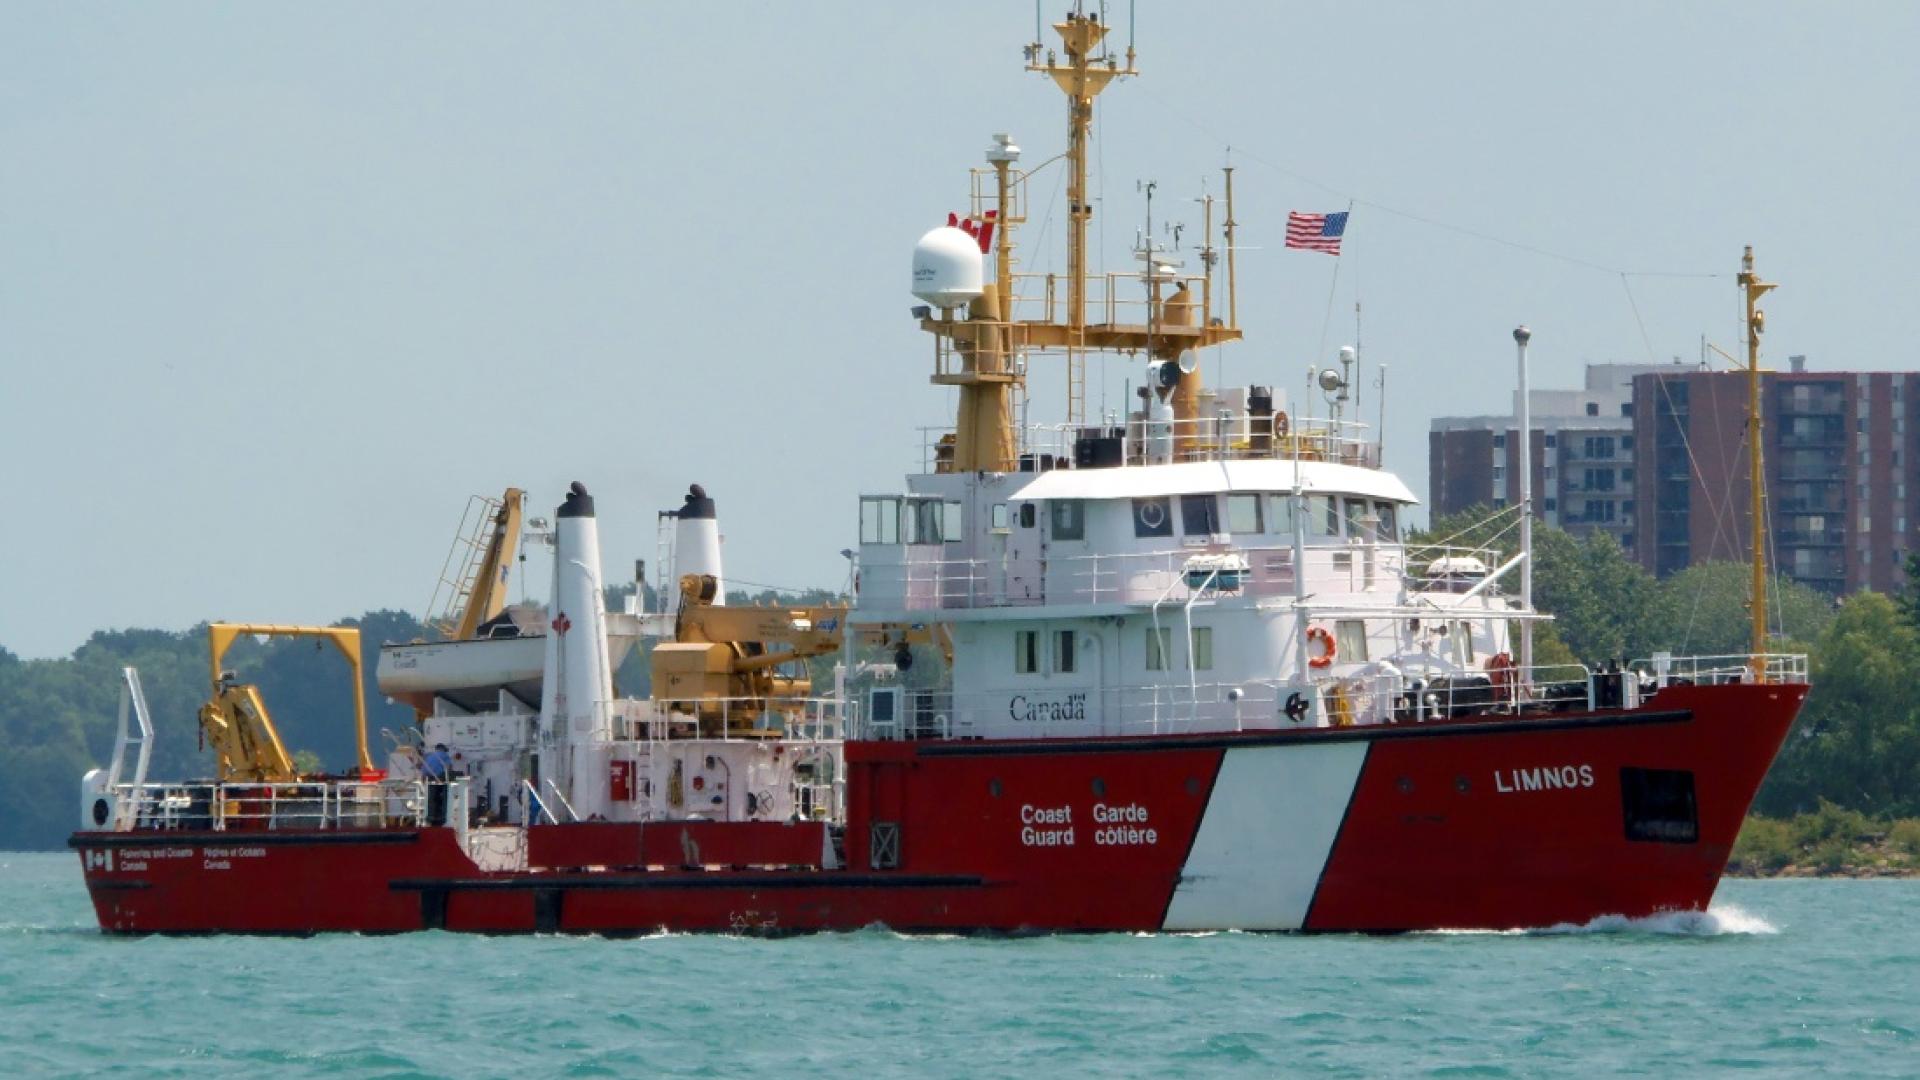 Water Matters - The Limnos, a Canadian Coast Guard research vessel